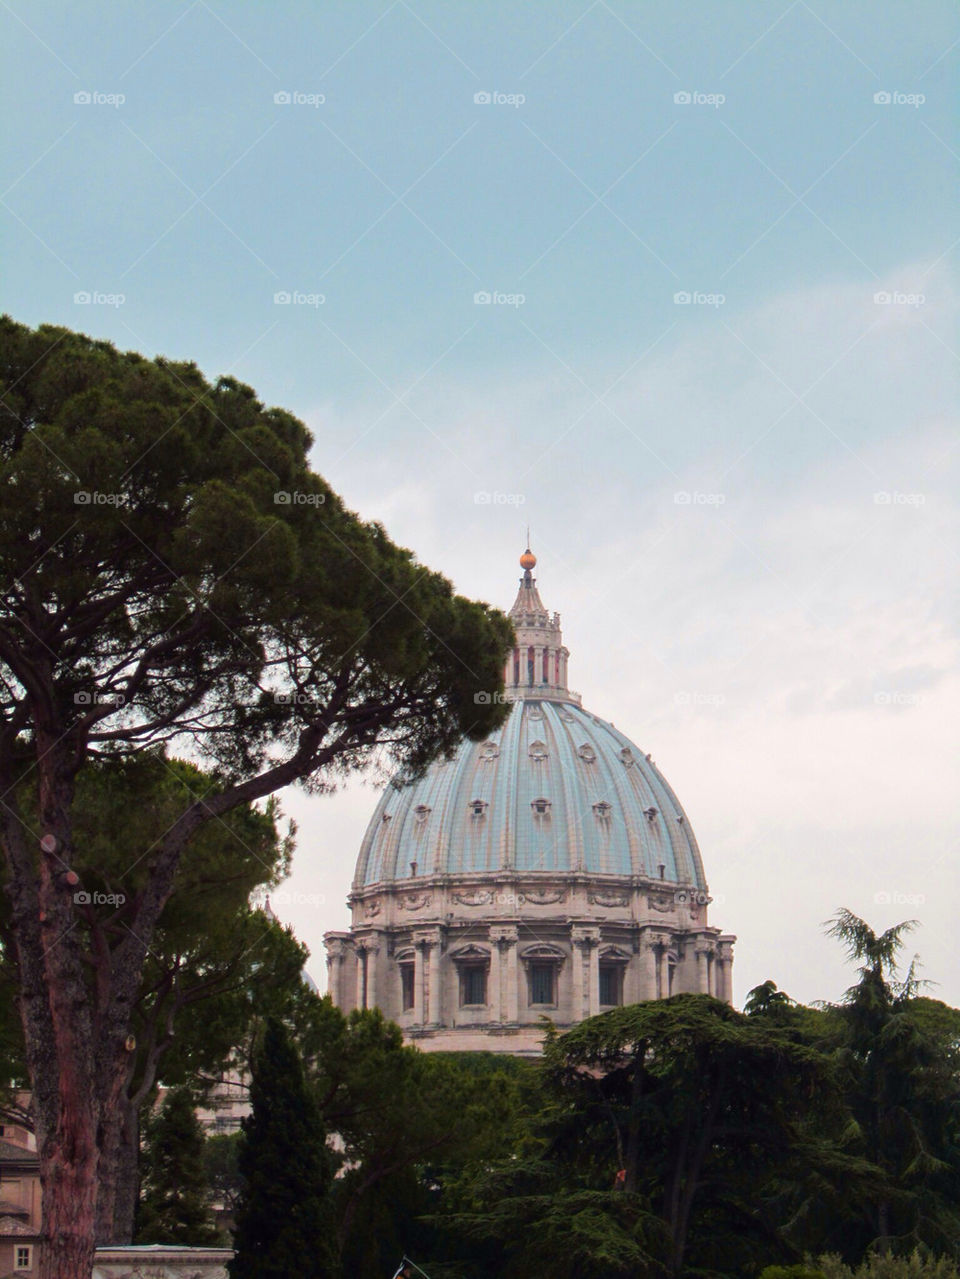 The dome of St. Peter